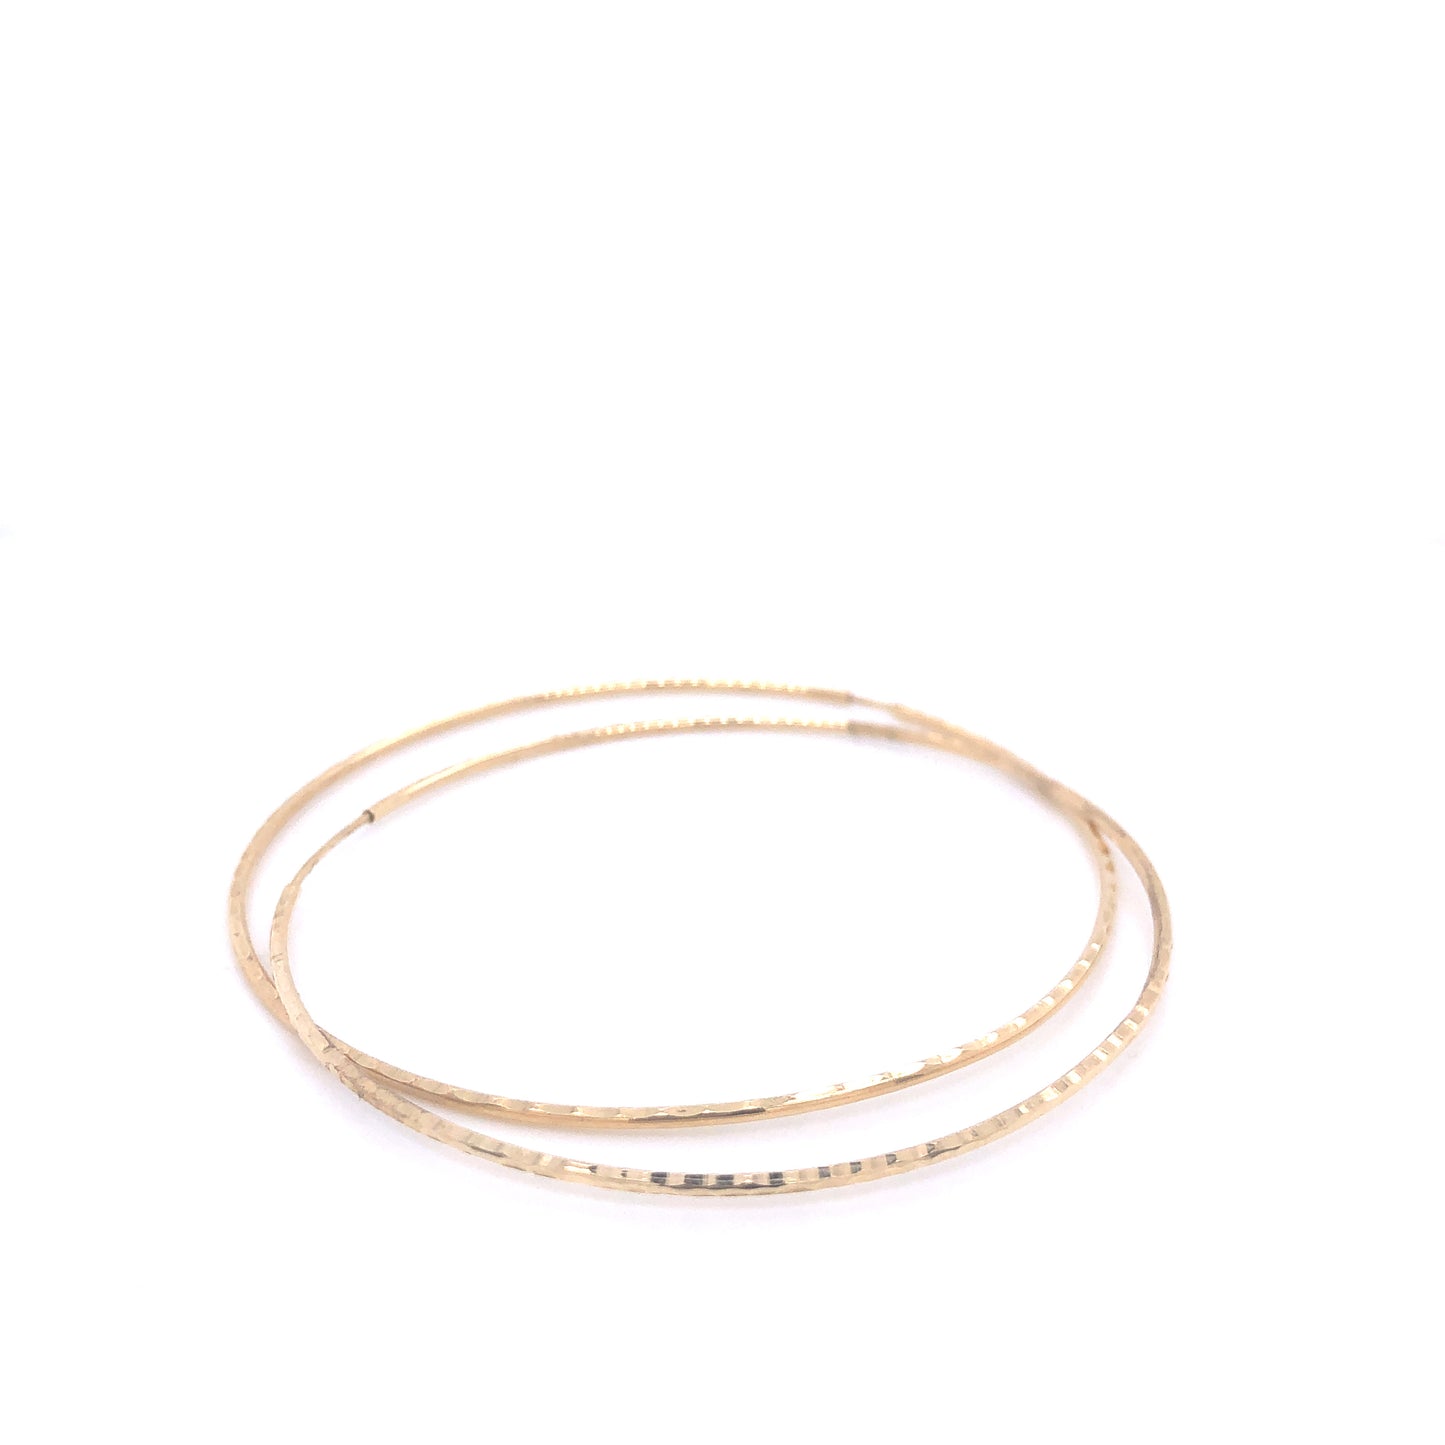 Large 14k Gold Diamond Cut Hoops | Luby Gold Collection | Luby 